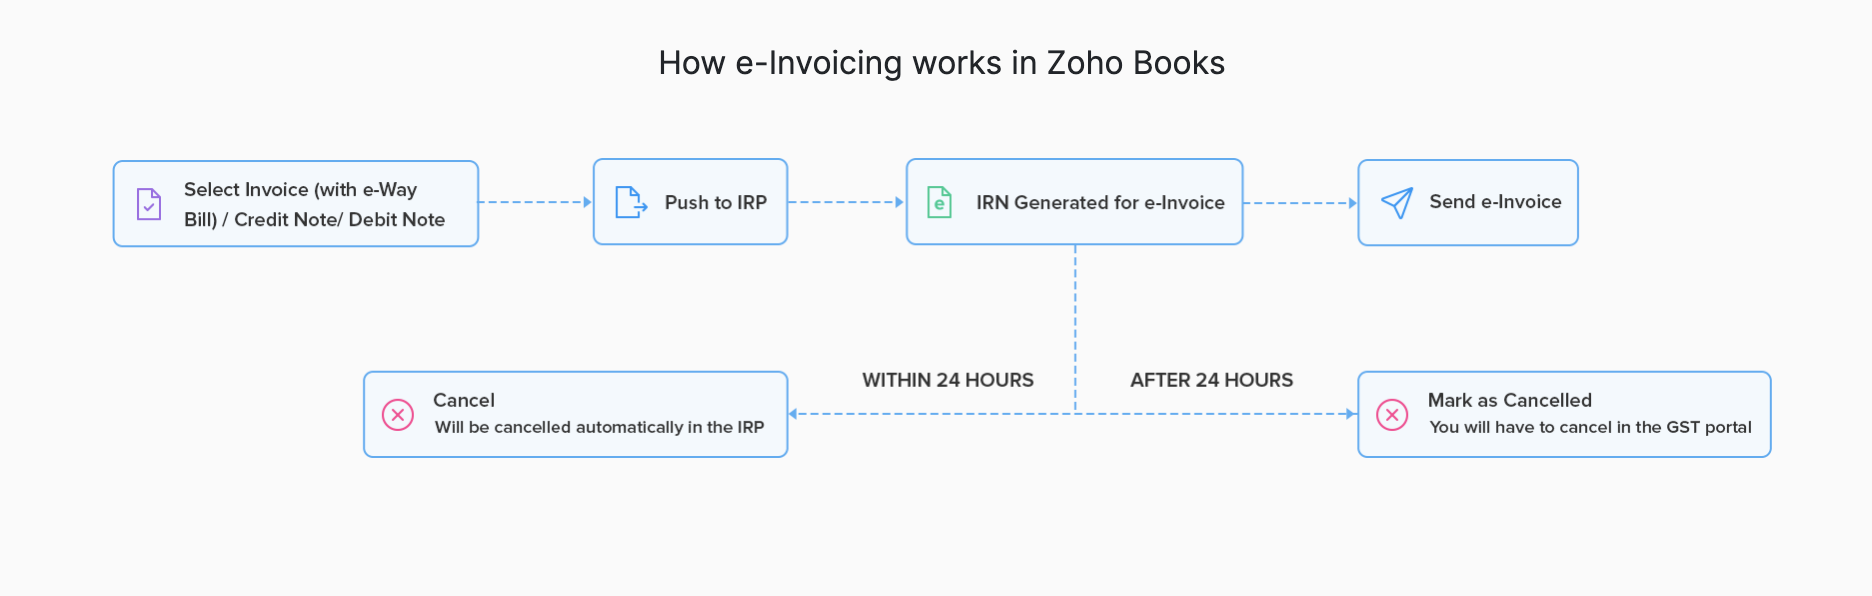 How e-Invoicing works in Zoho Books